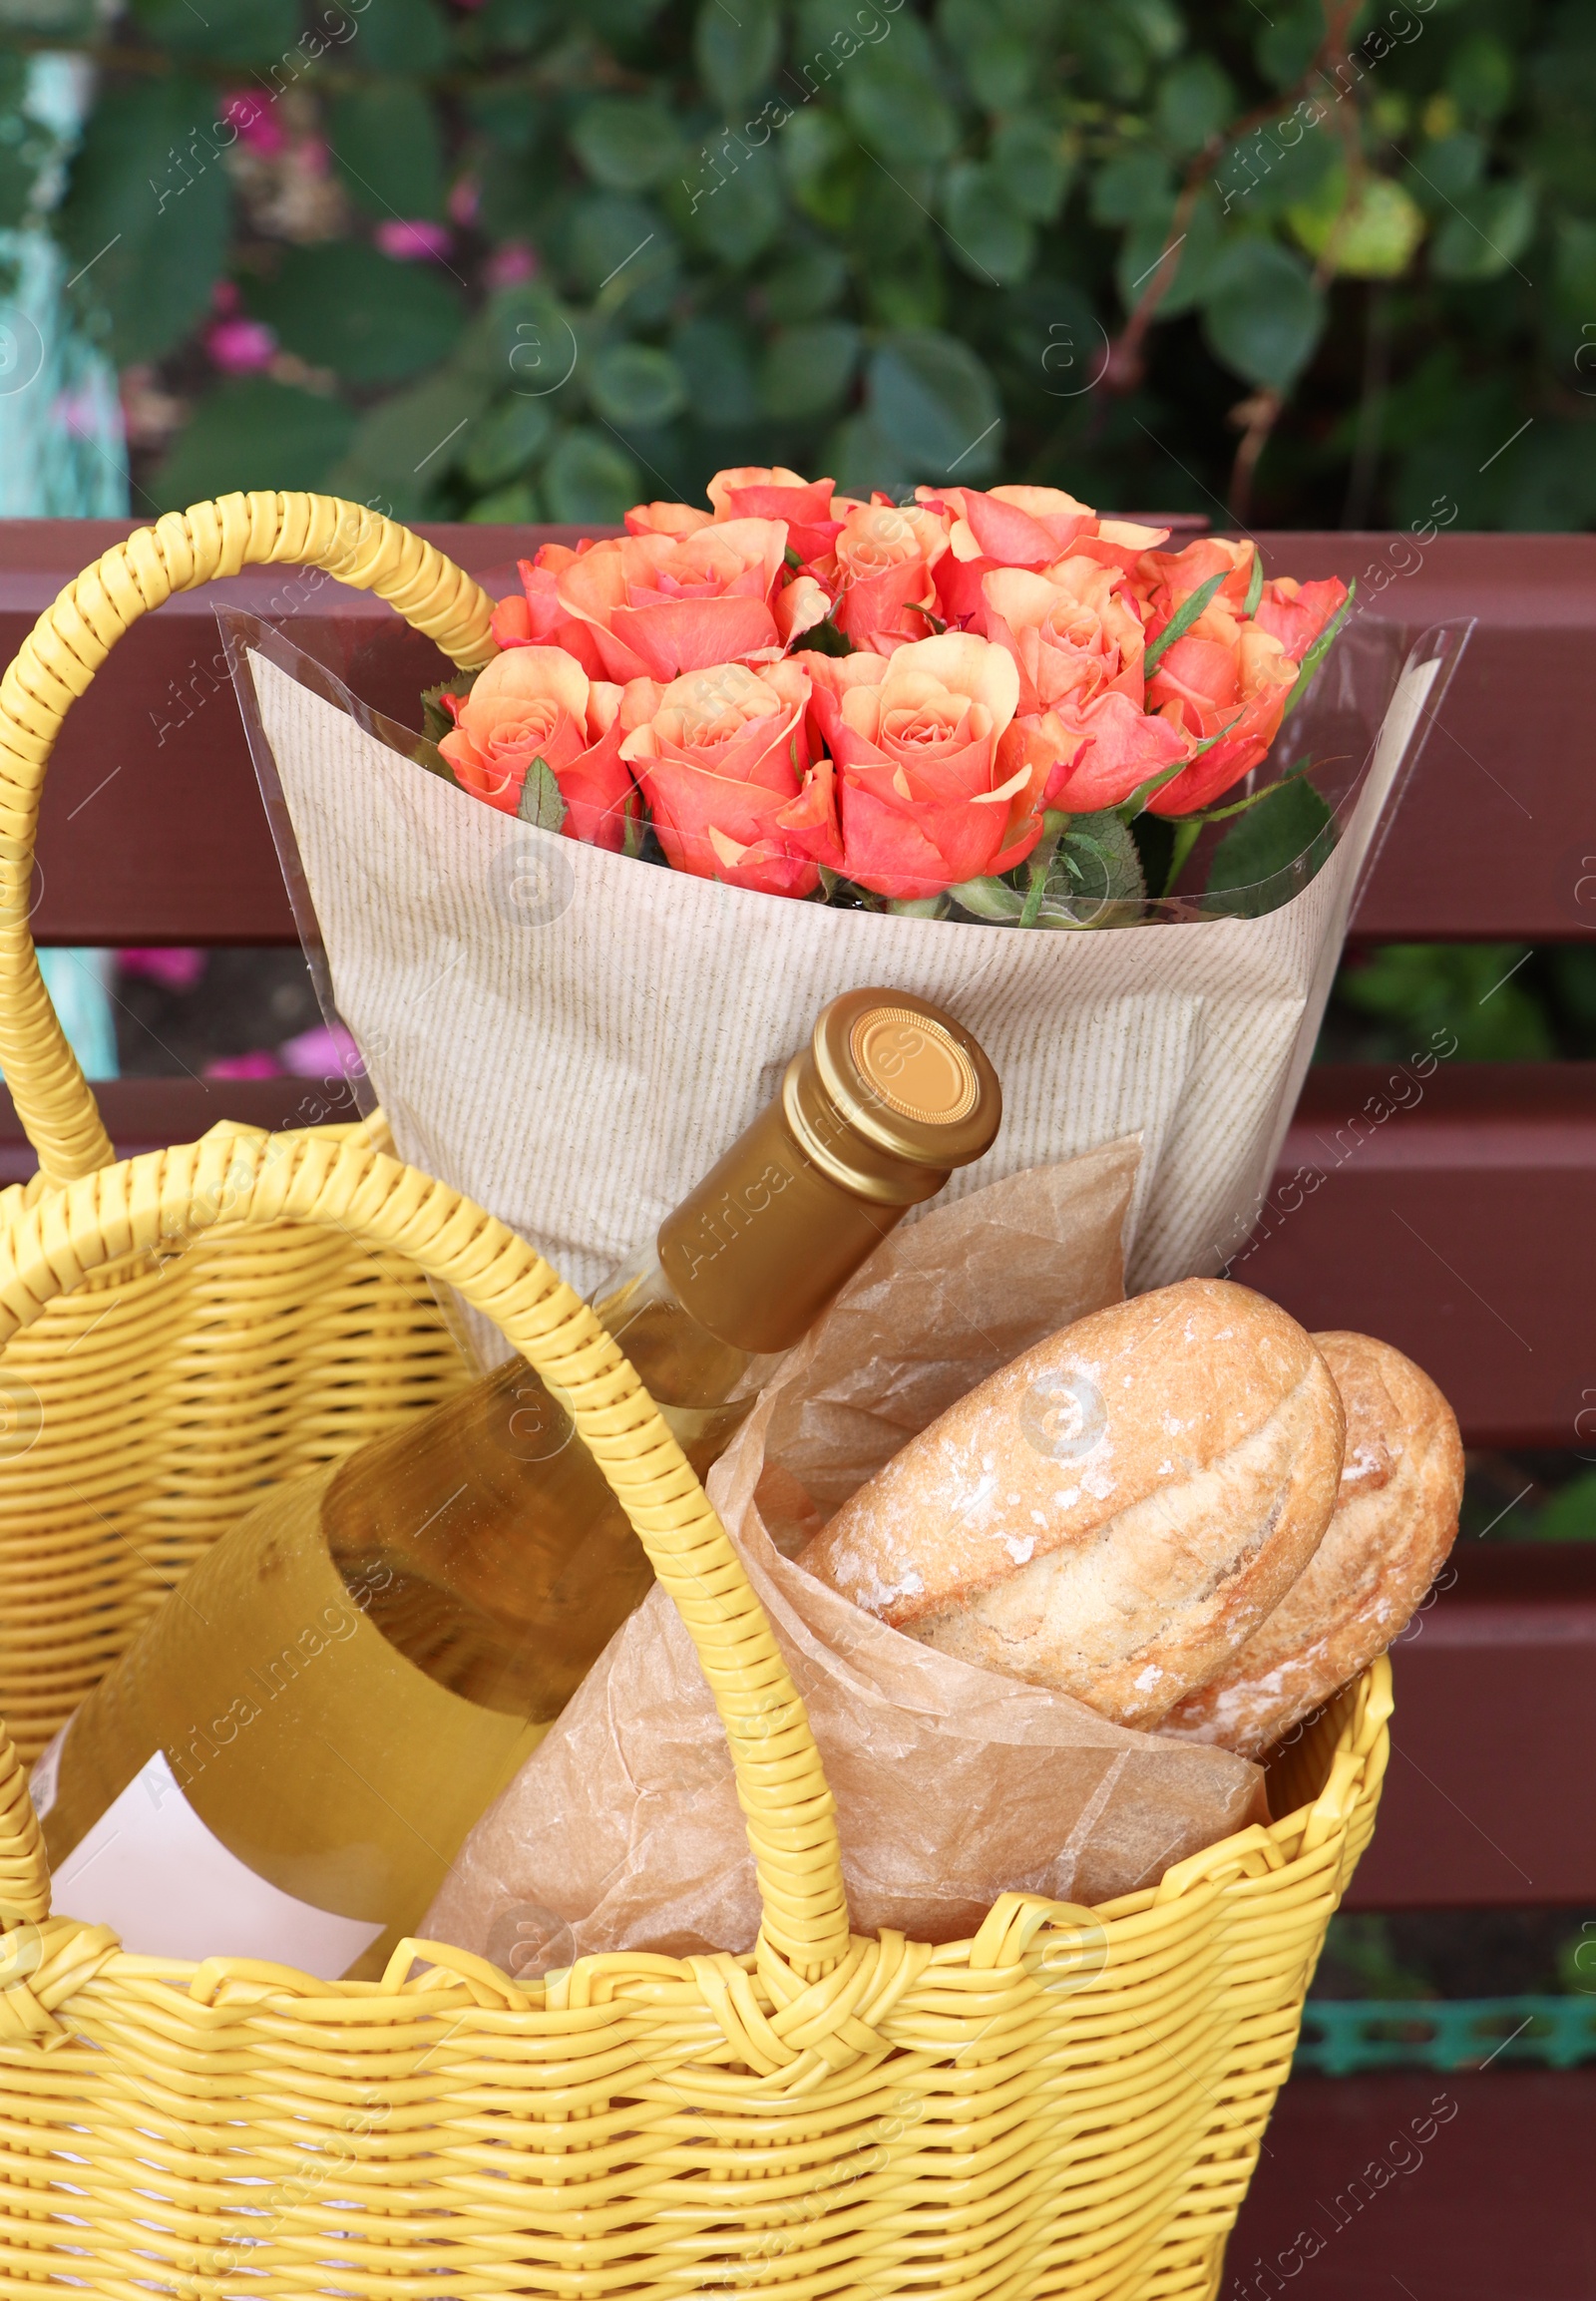 Photo of Beautiful roses, bottle of wine and baguettes in yellow wicker bag on bench outdoors